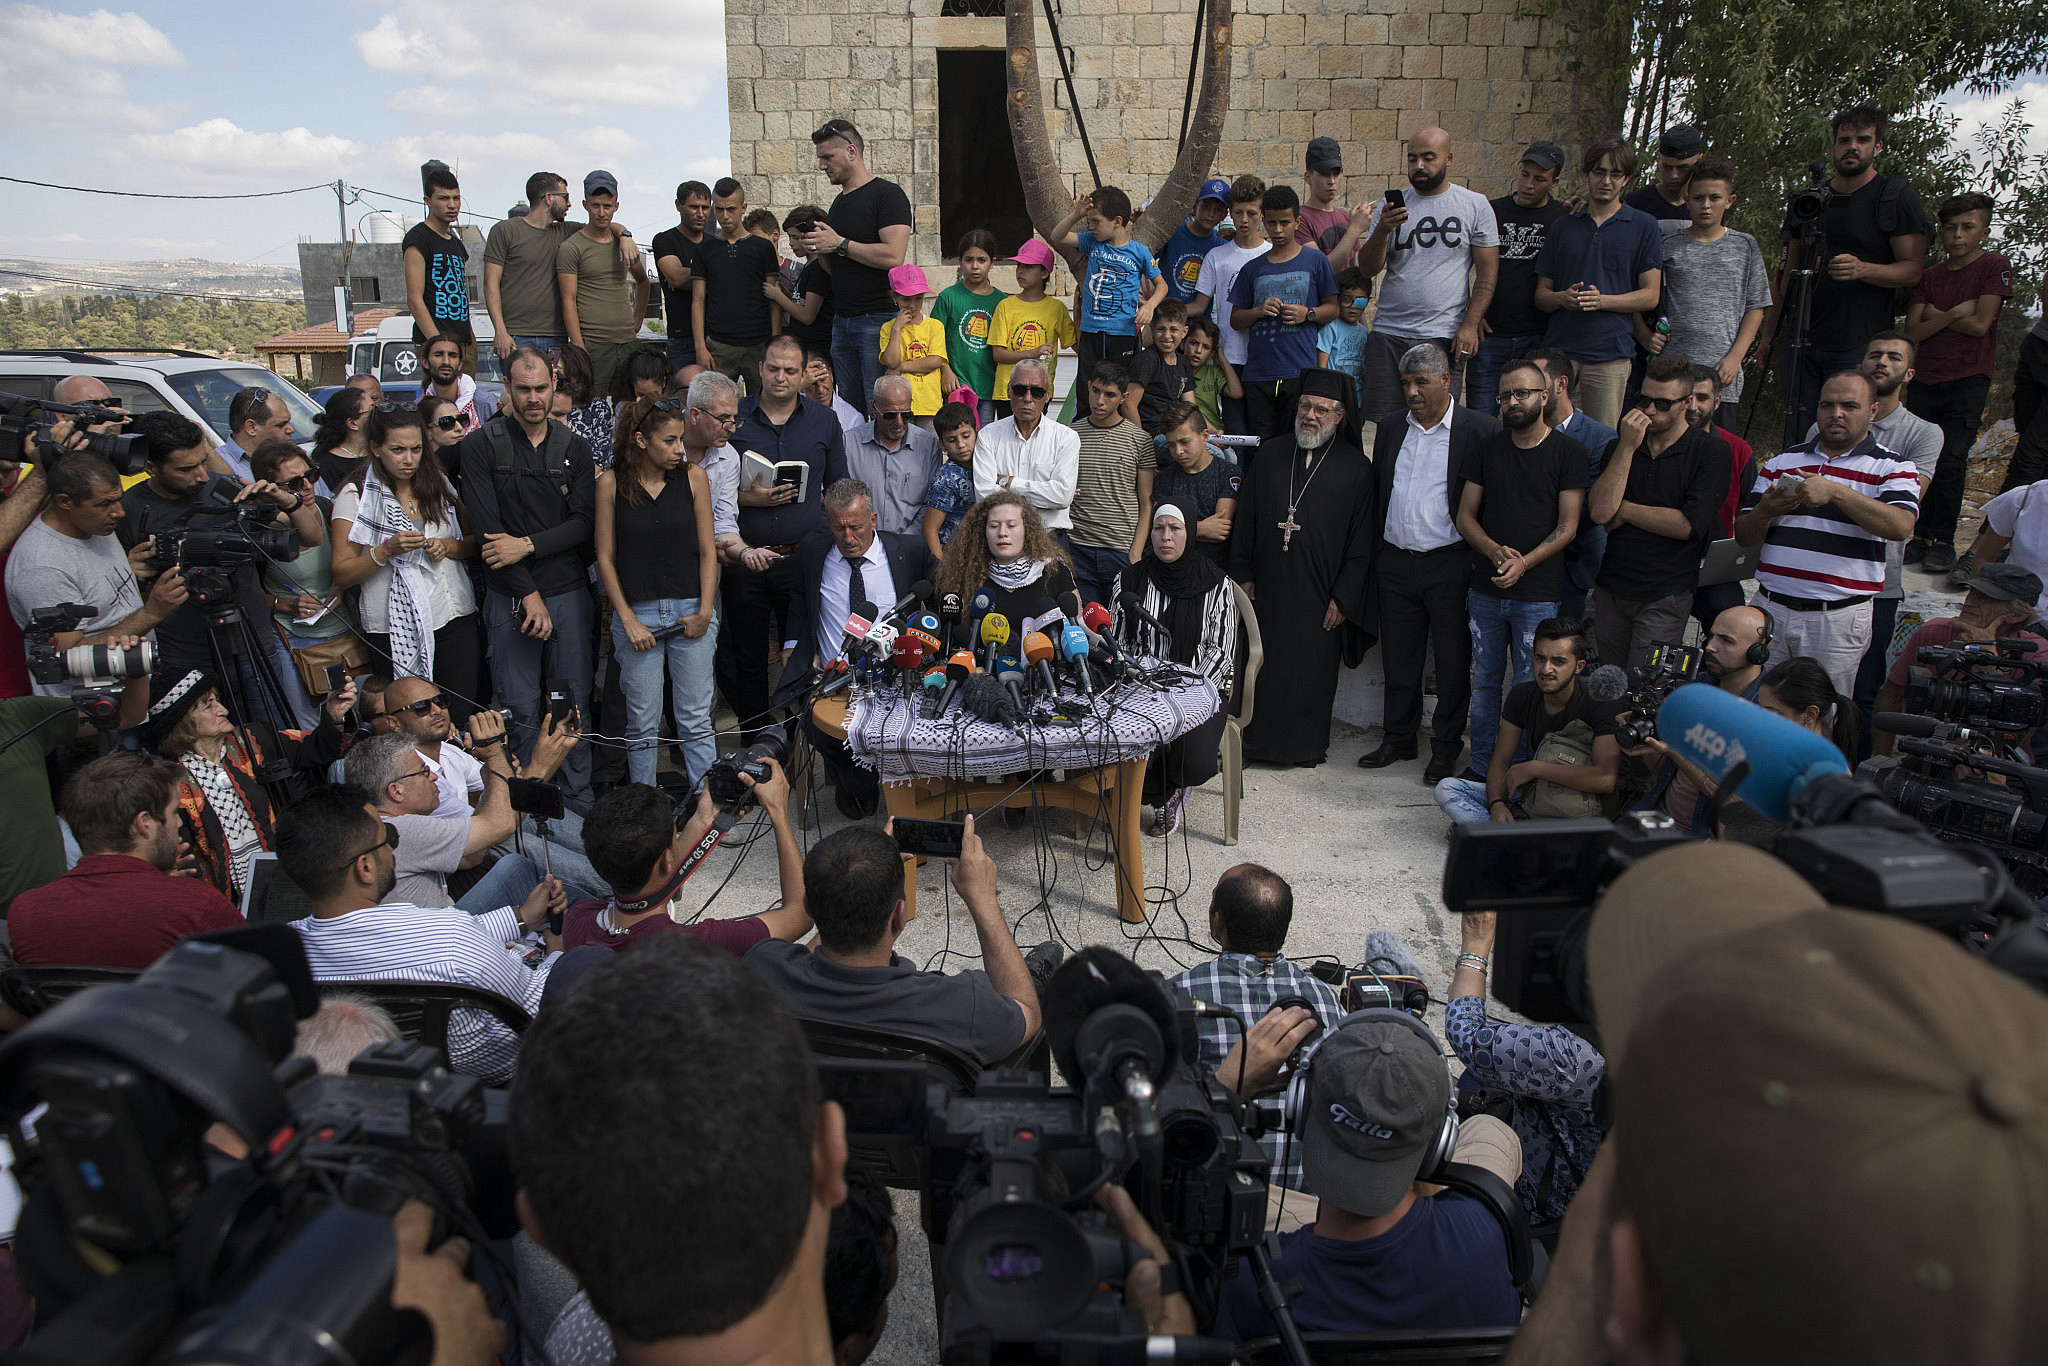 Palestinian youth activist Ahed Tamimi and her family hold a press conference in their home village of Nabi Saleh, following their release from an Israeli prison after an eight-month sentence, July 29, 2018. (Oren Ziv/Activestills)